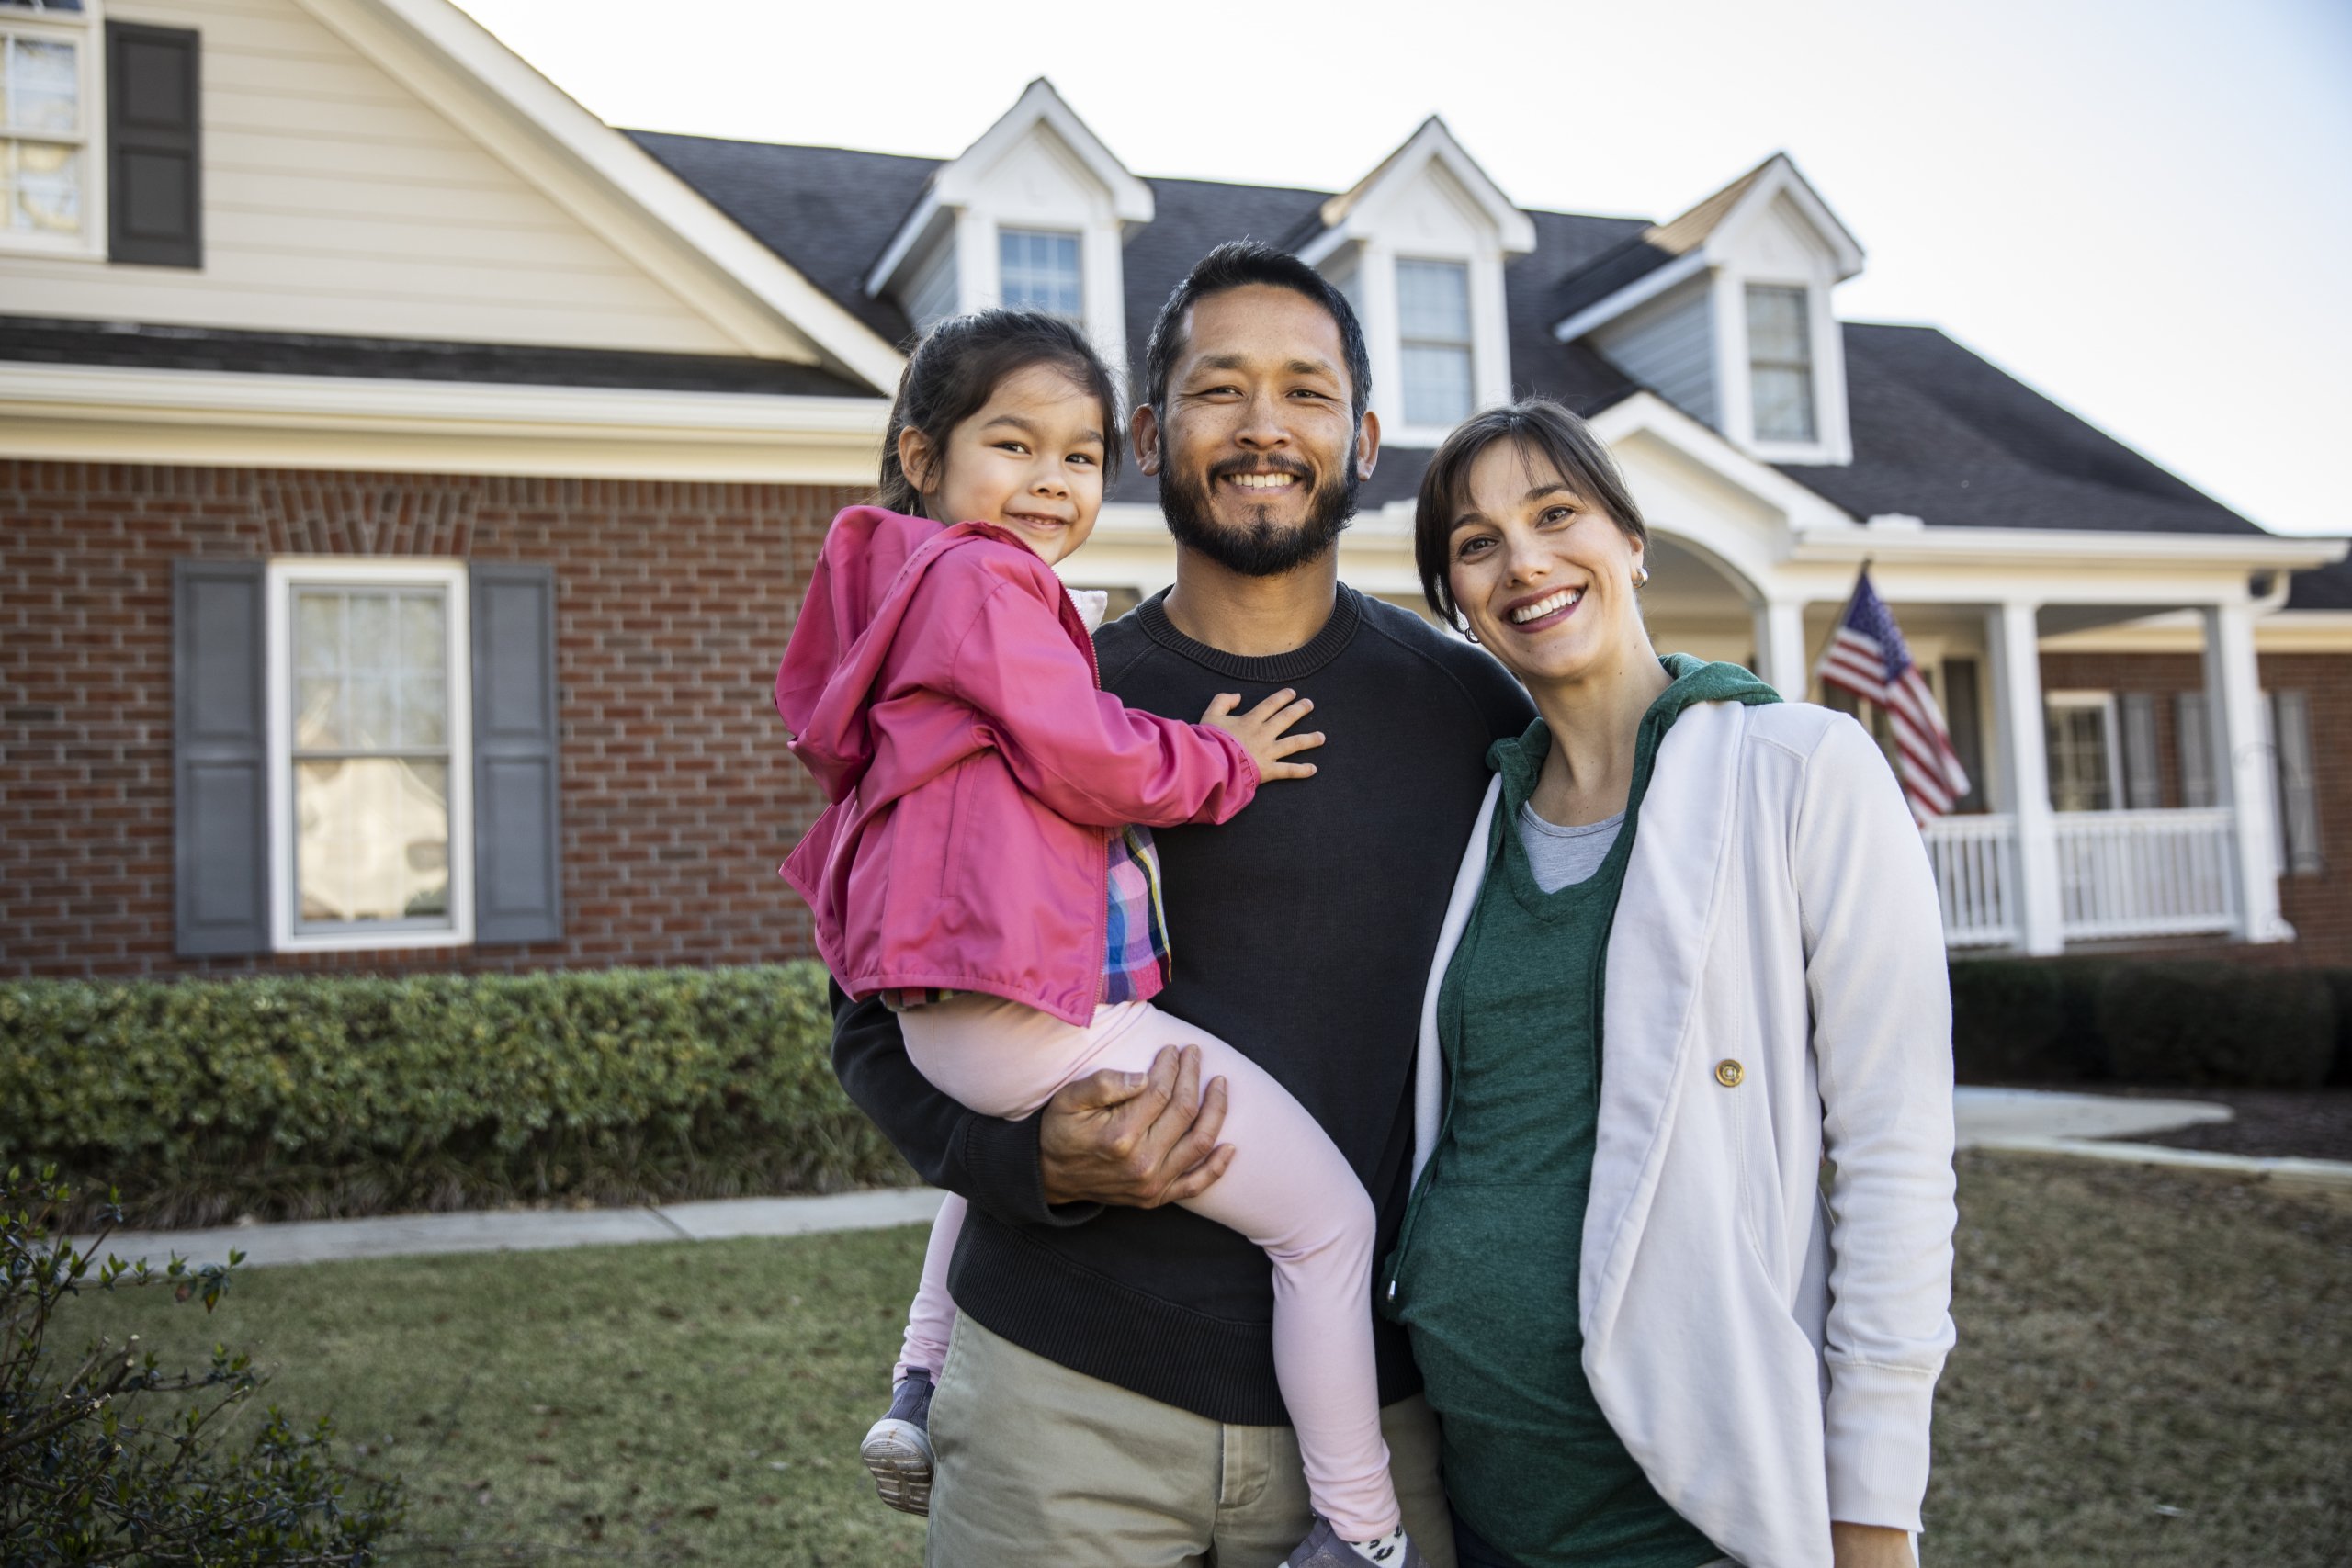 A smiling family of three standing in front of their new home, which is a type of collateral.